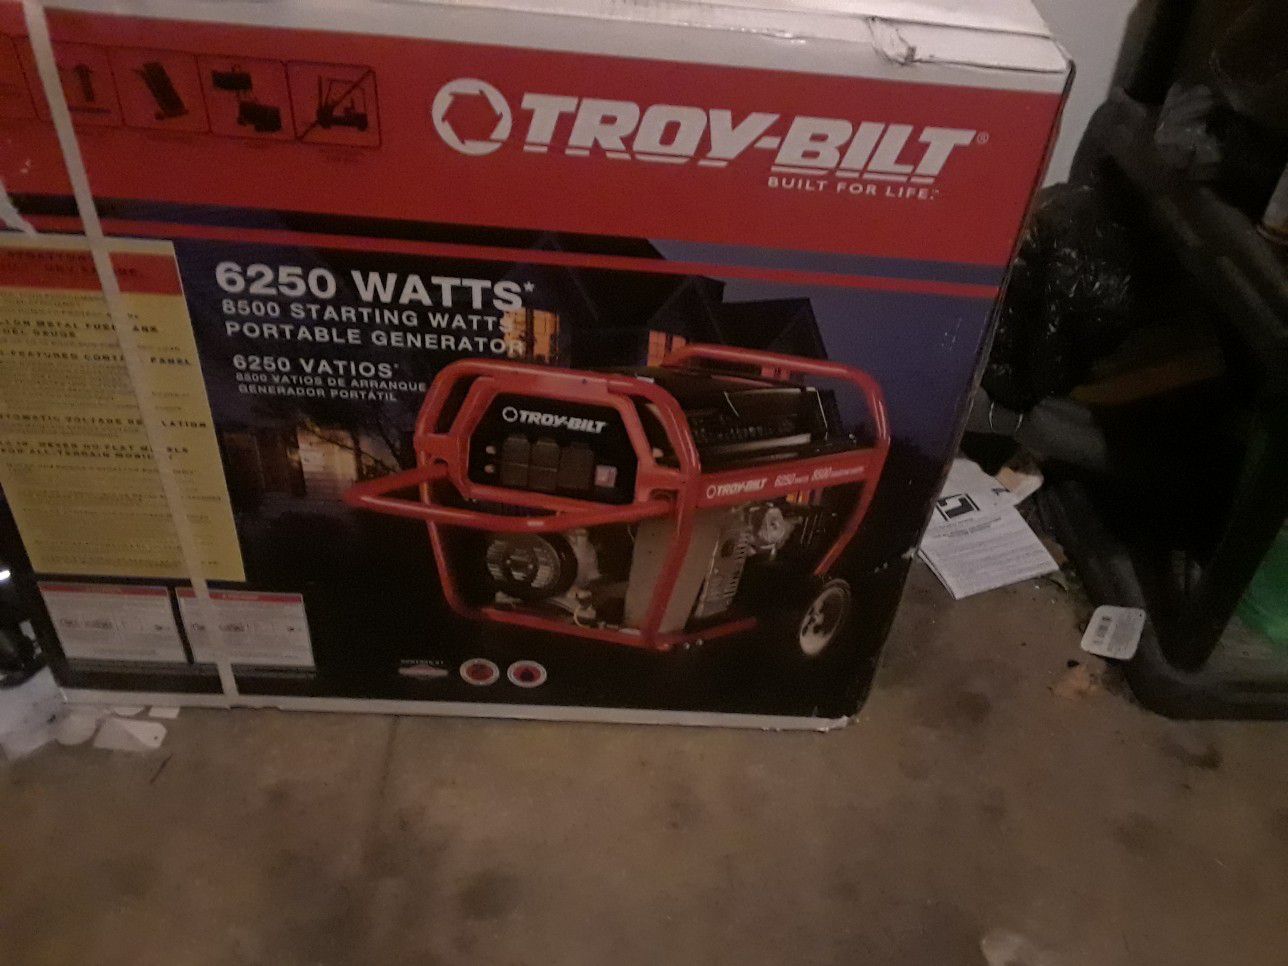 Generator, wire tester and 75' gas line